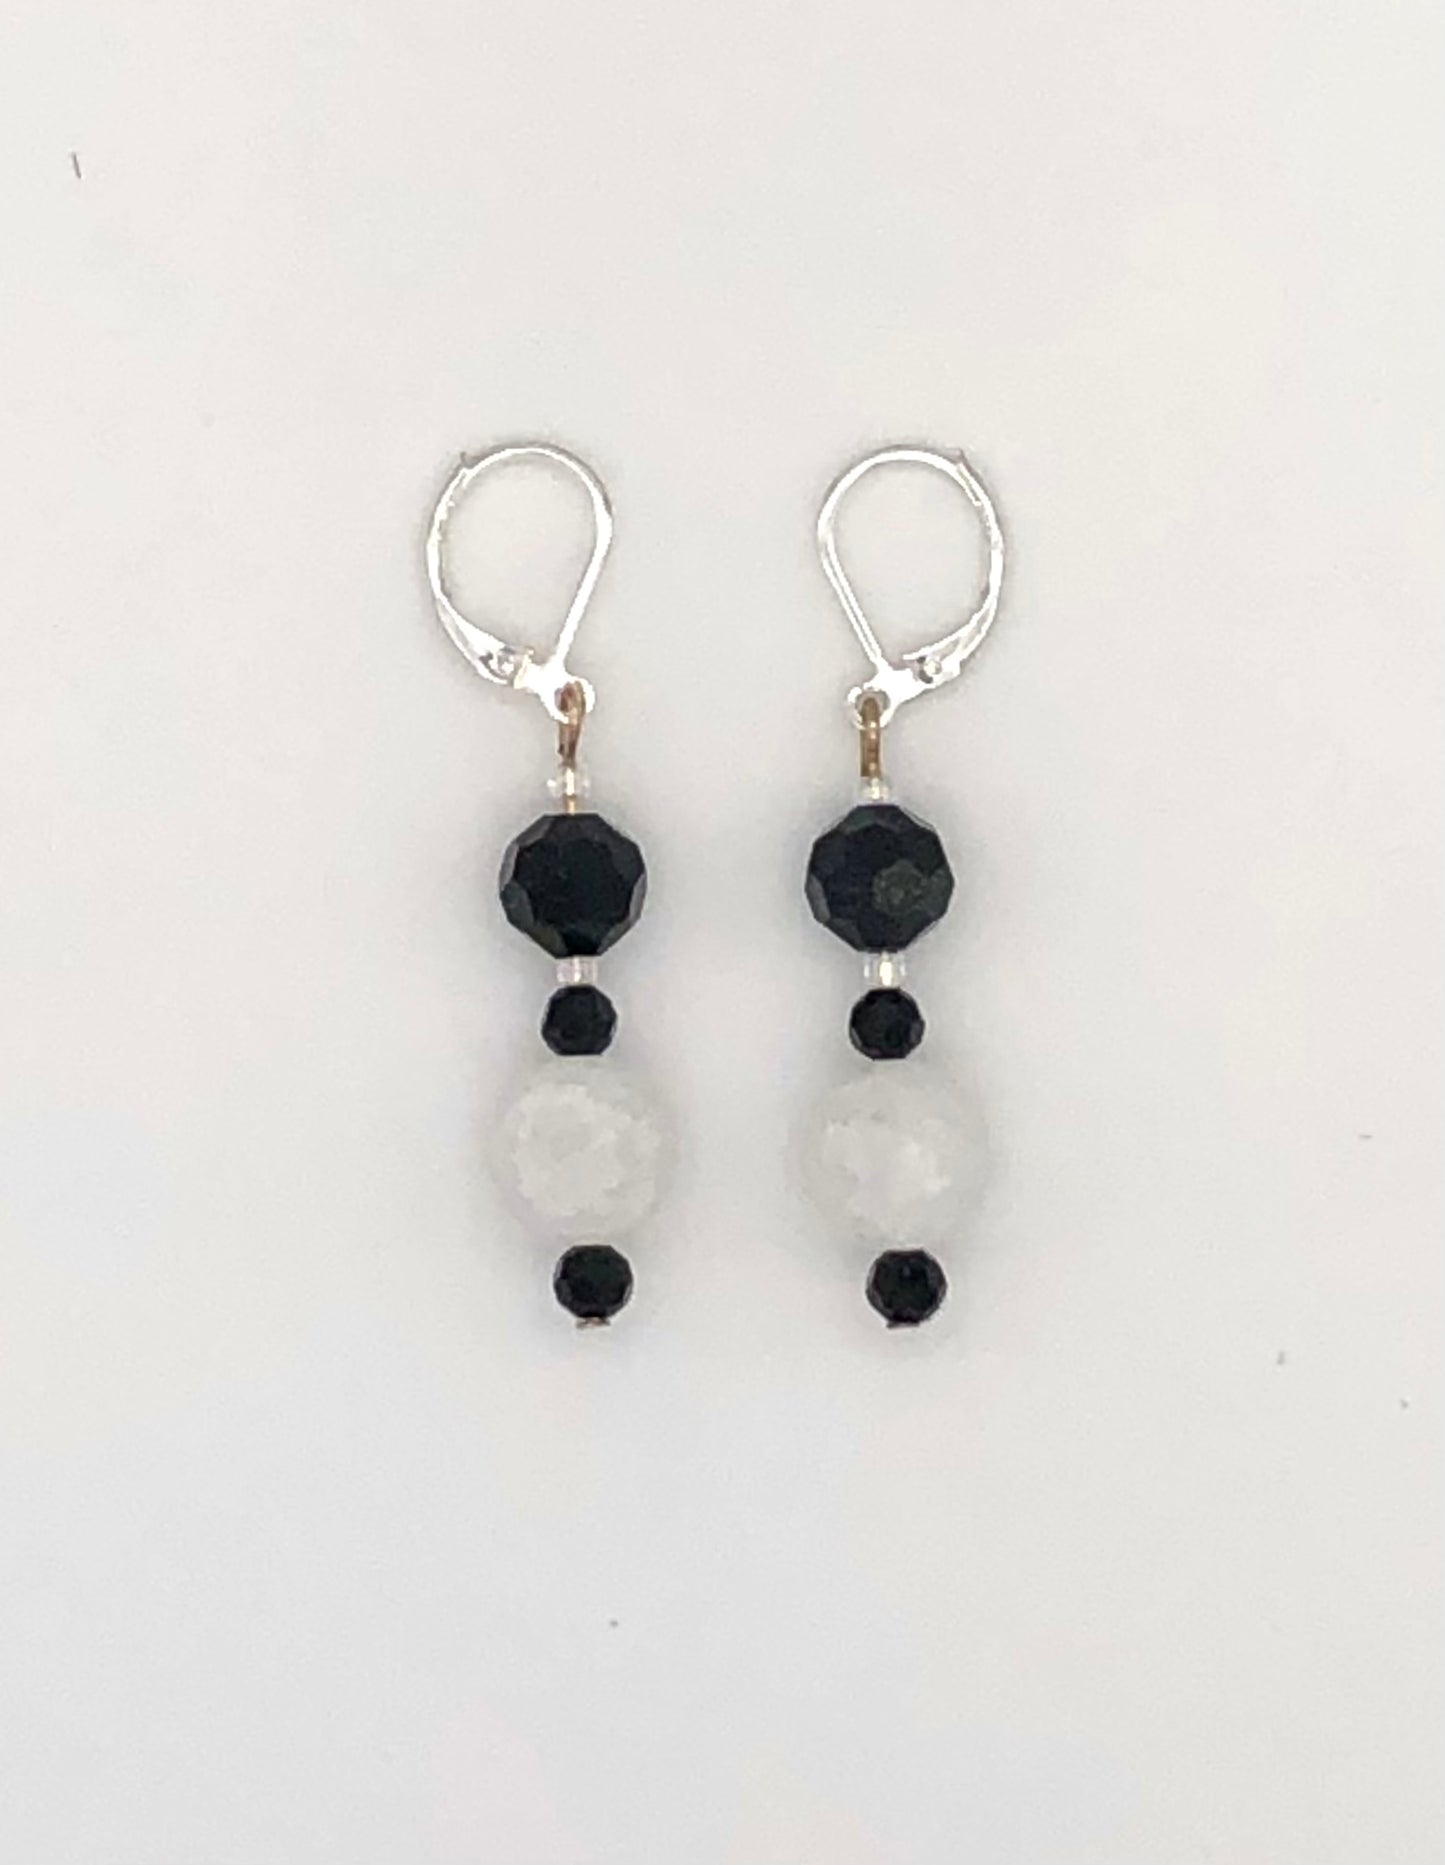 Black faceted and white crackle bead earrings